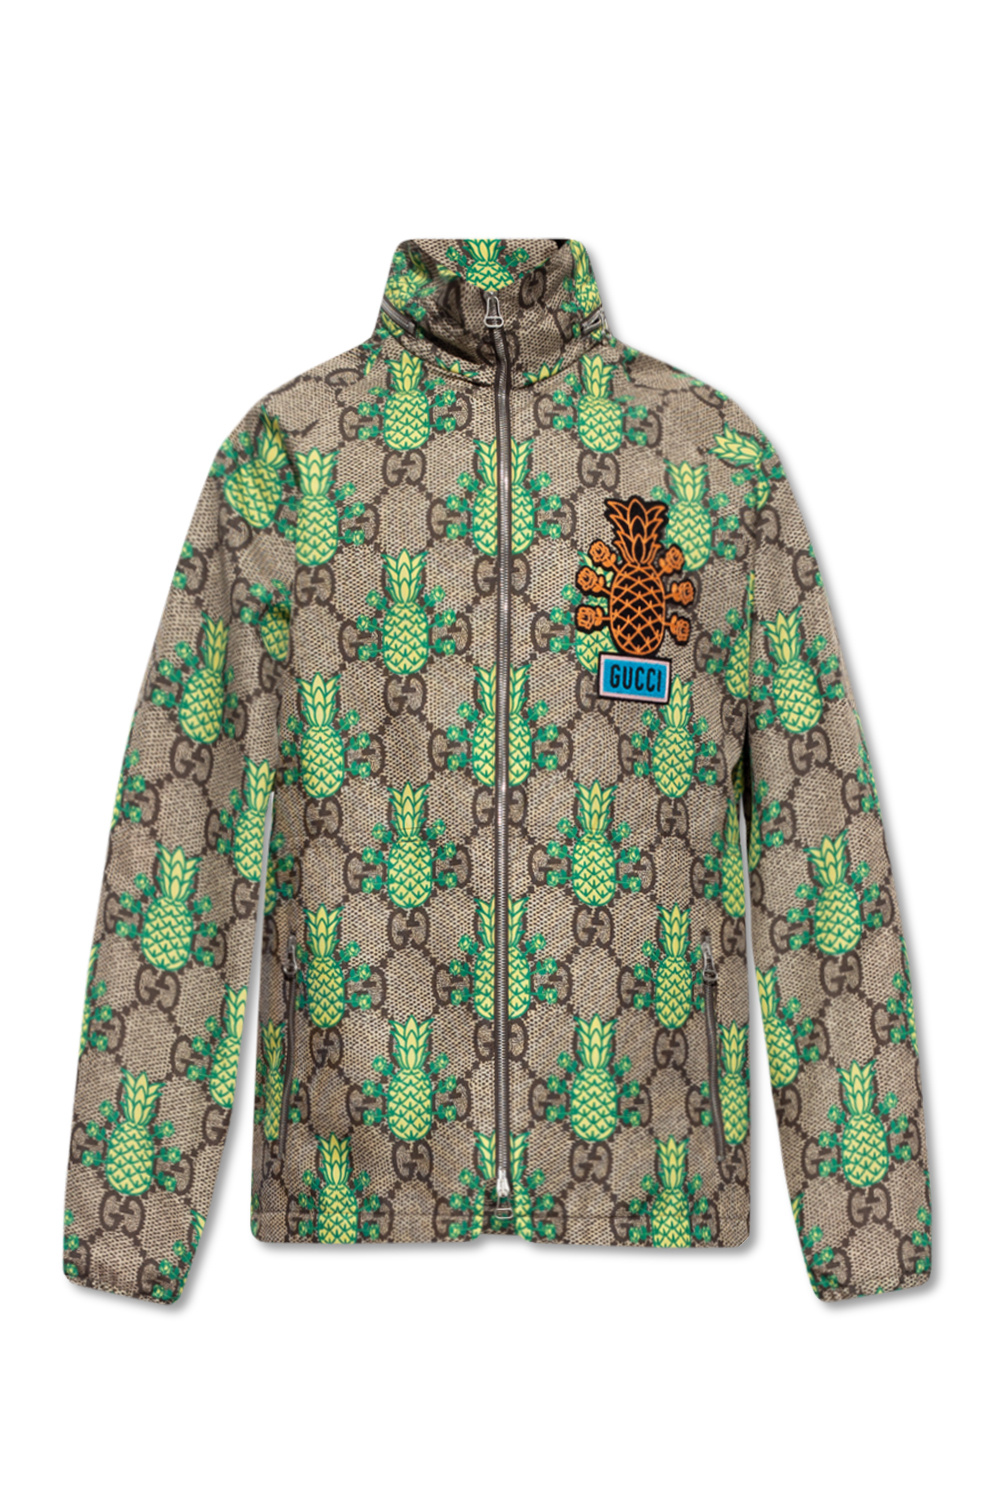 Gucci The 'Gucci Pineapple' collection jacket | Men's Clothing | Vitkac